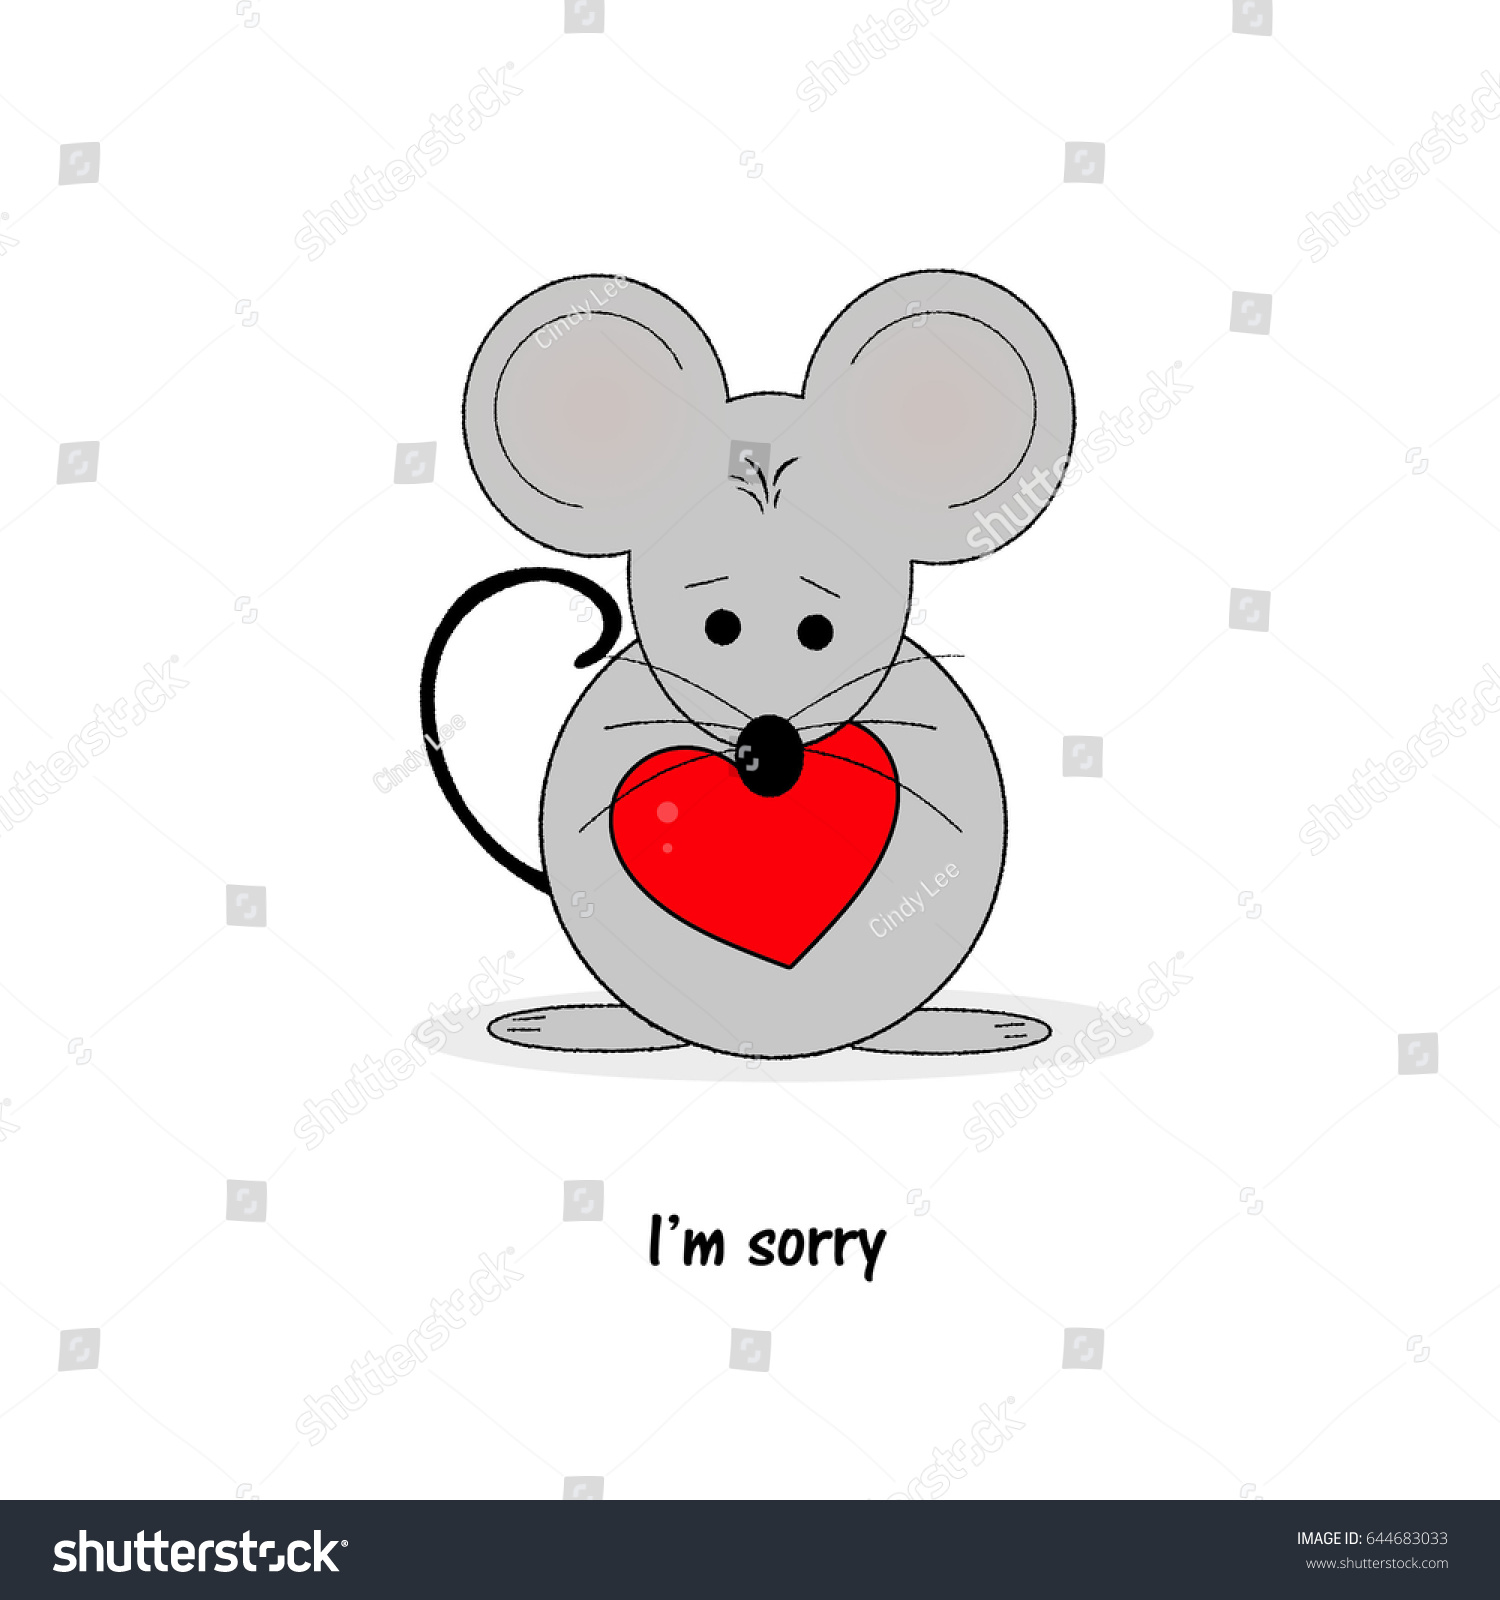 Which one deeply reliability Mouse Red Heart Im Sorry Stock Illustration 644683033 | Shutterstock